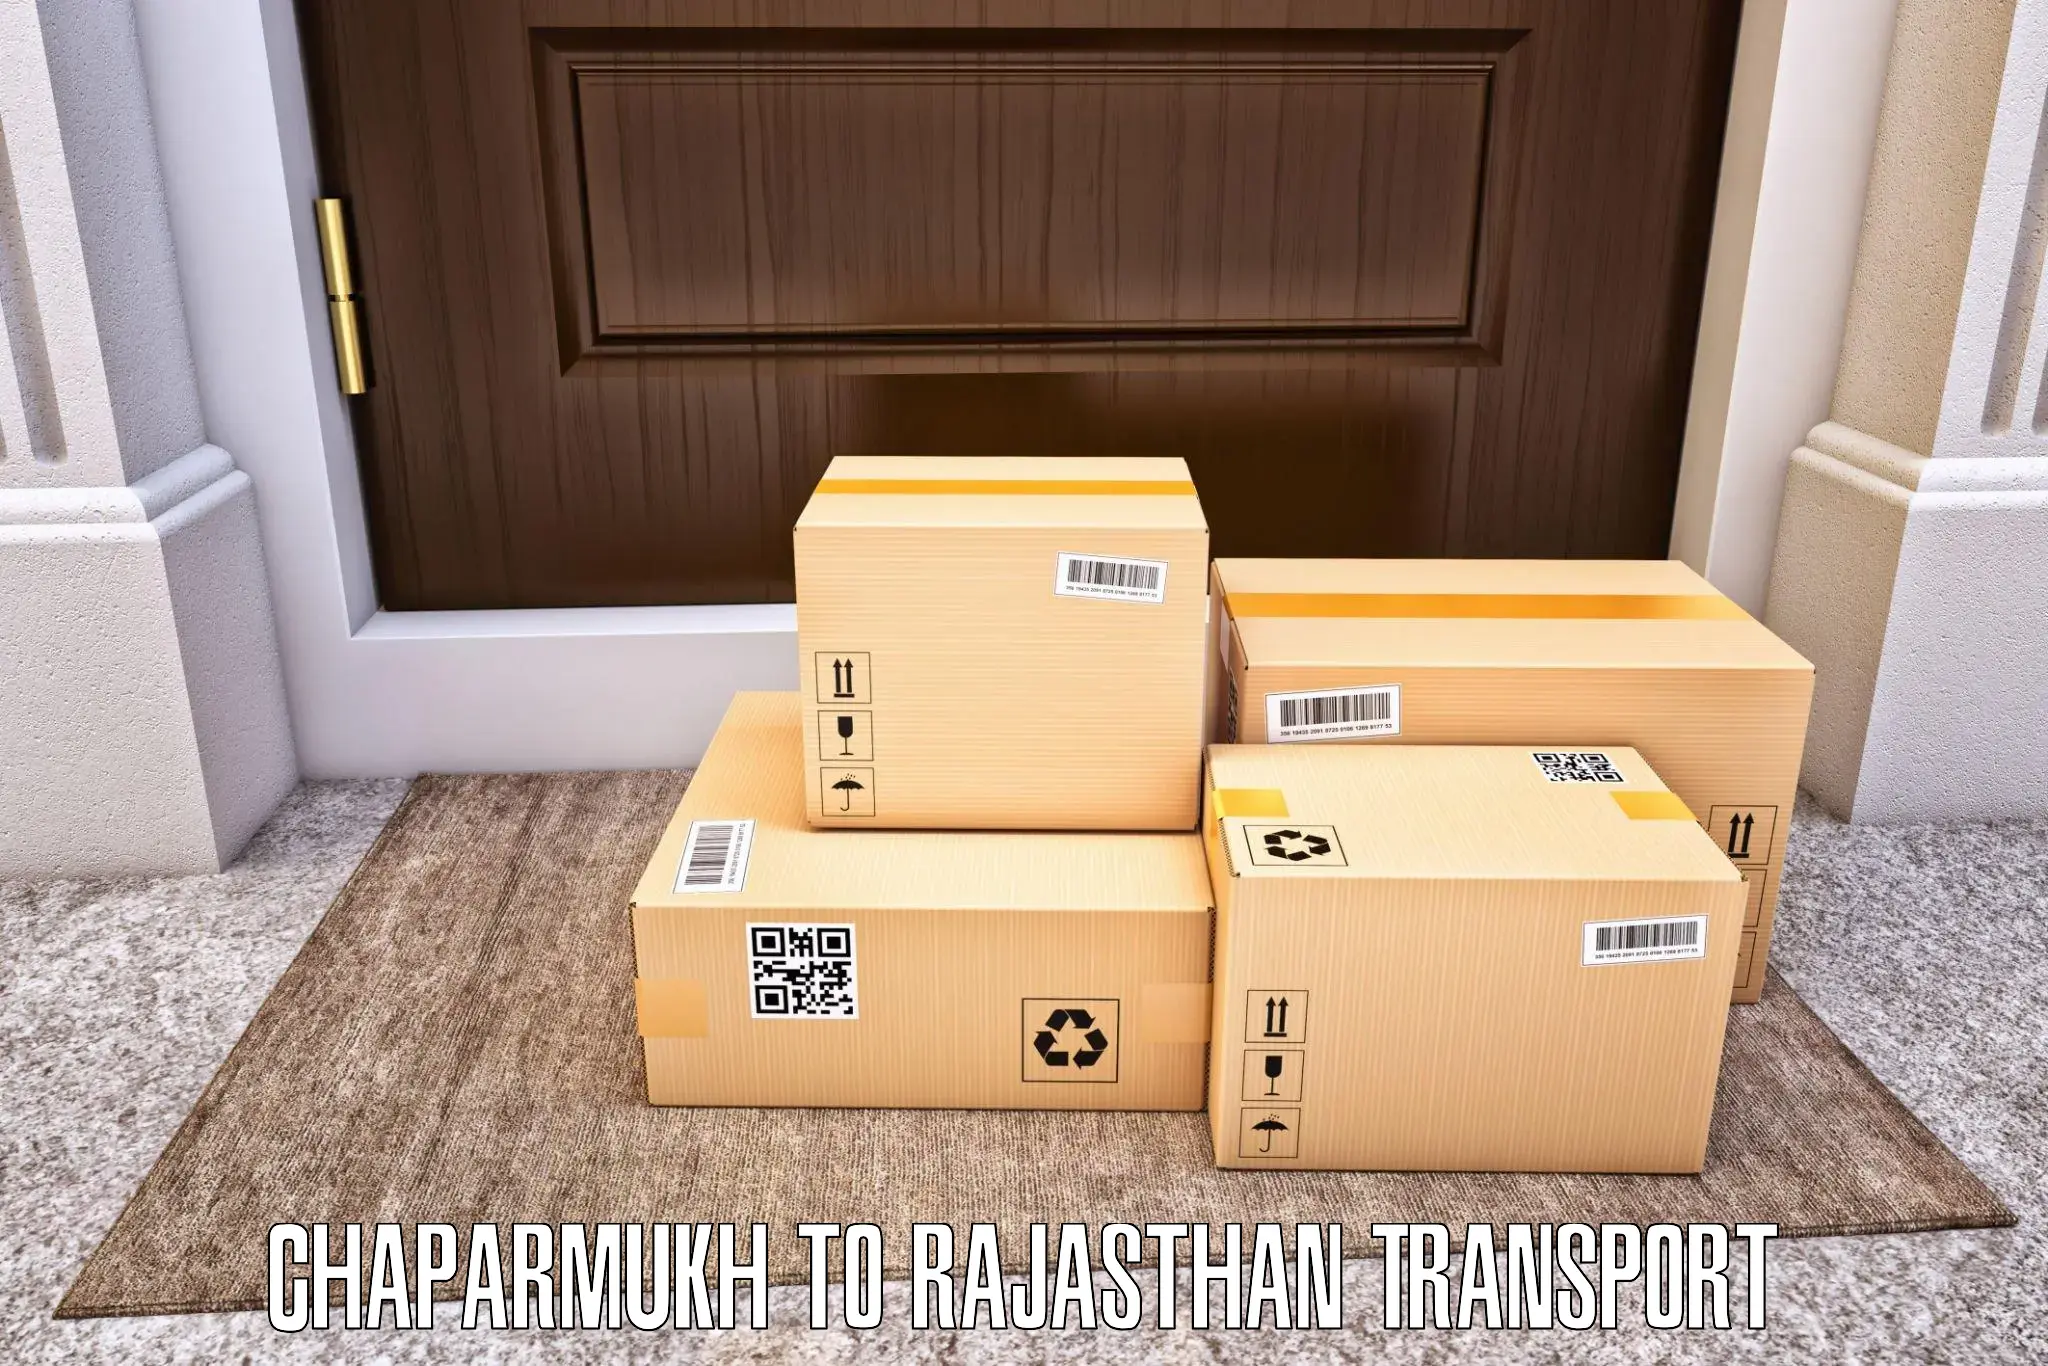 Goods transport services Chaparmukh to Dausa